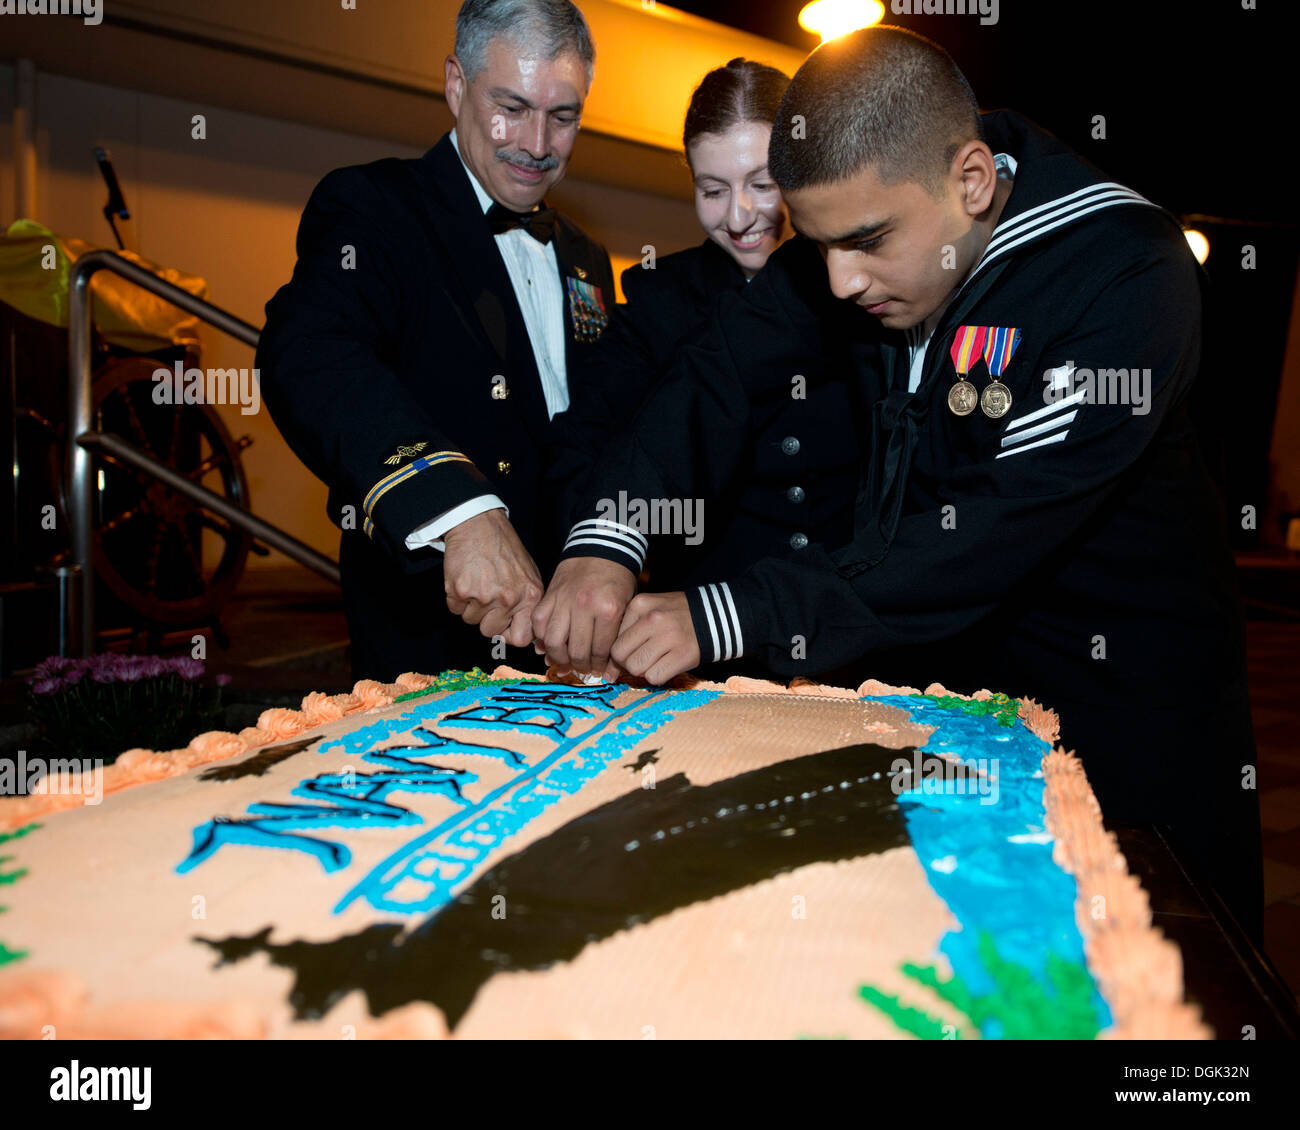 Commander, Fleet Air Forward Officer in Charge Chief Warrant Officer 5 Luis Quiroga cuts the cake with Personnel Specialist Seaman Apprentice Sarah Garson (Center) and Personnel Specialist Seaman Jamal Etrata, both from Naval Air Facility (NAF) Atsugi's P Stock Photo